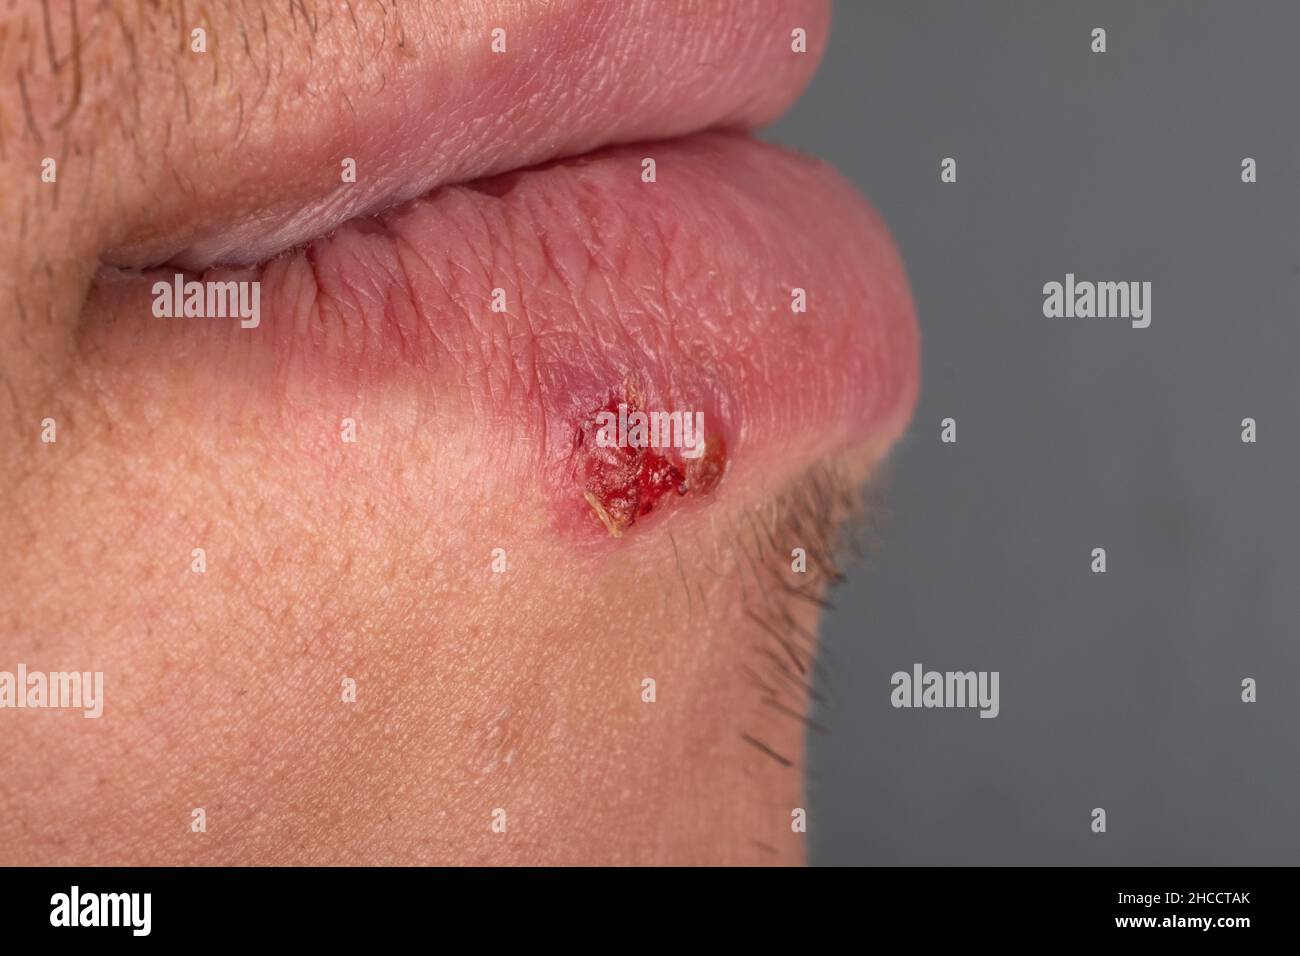 herpes in lips is a viral skin disease closeup Stock Photo